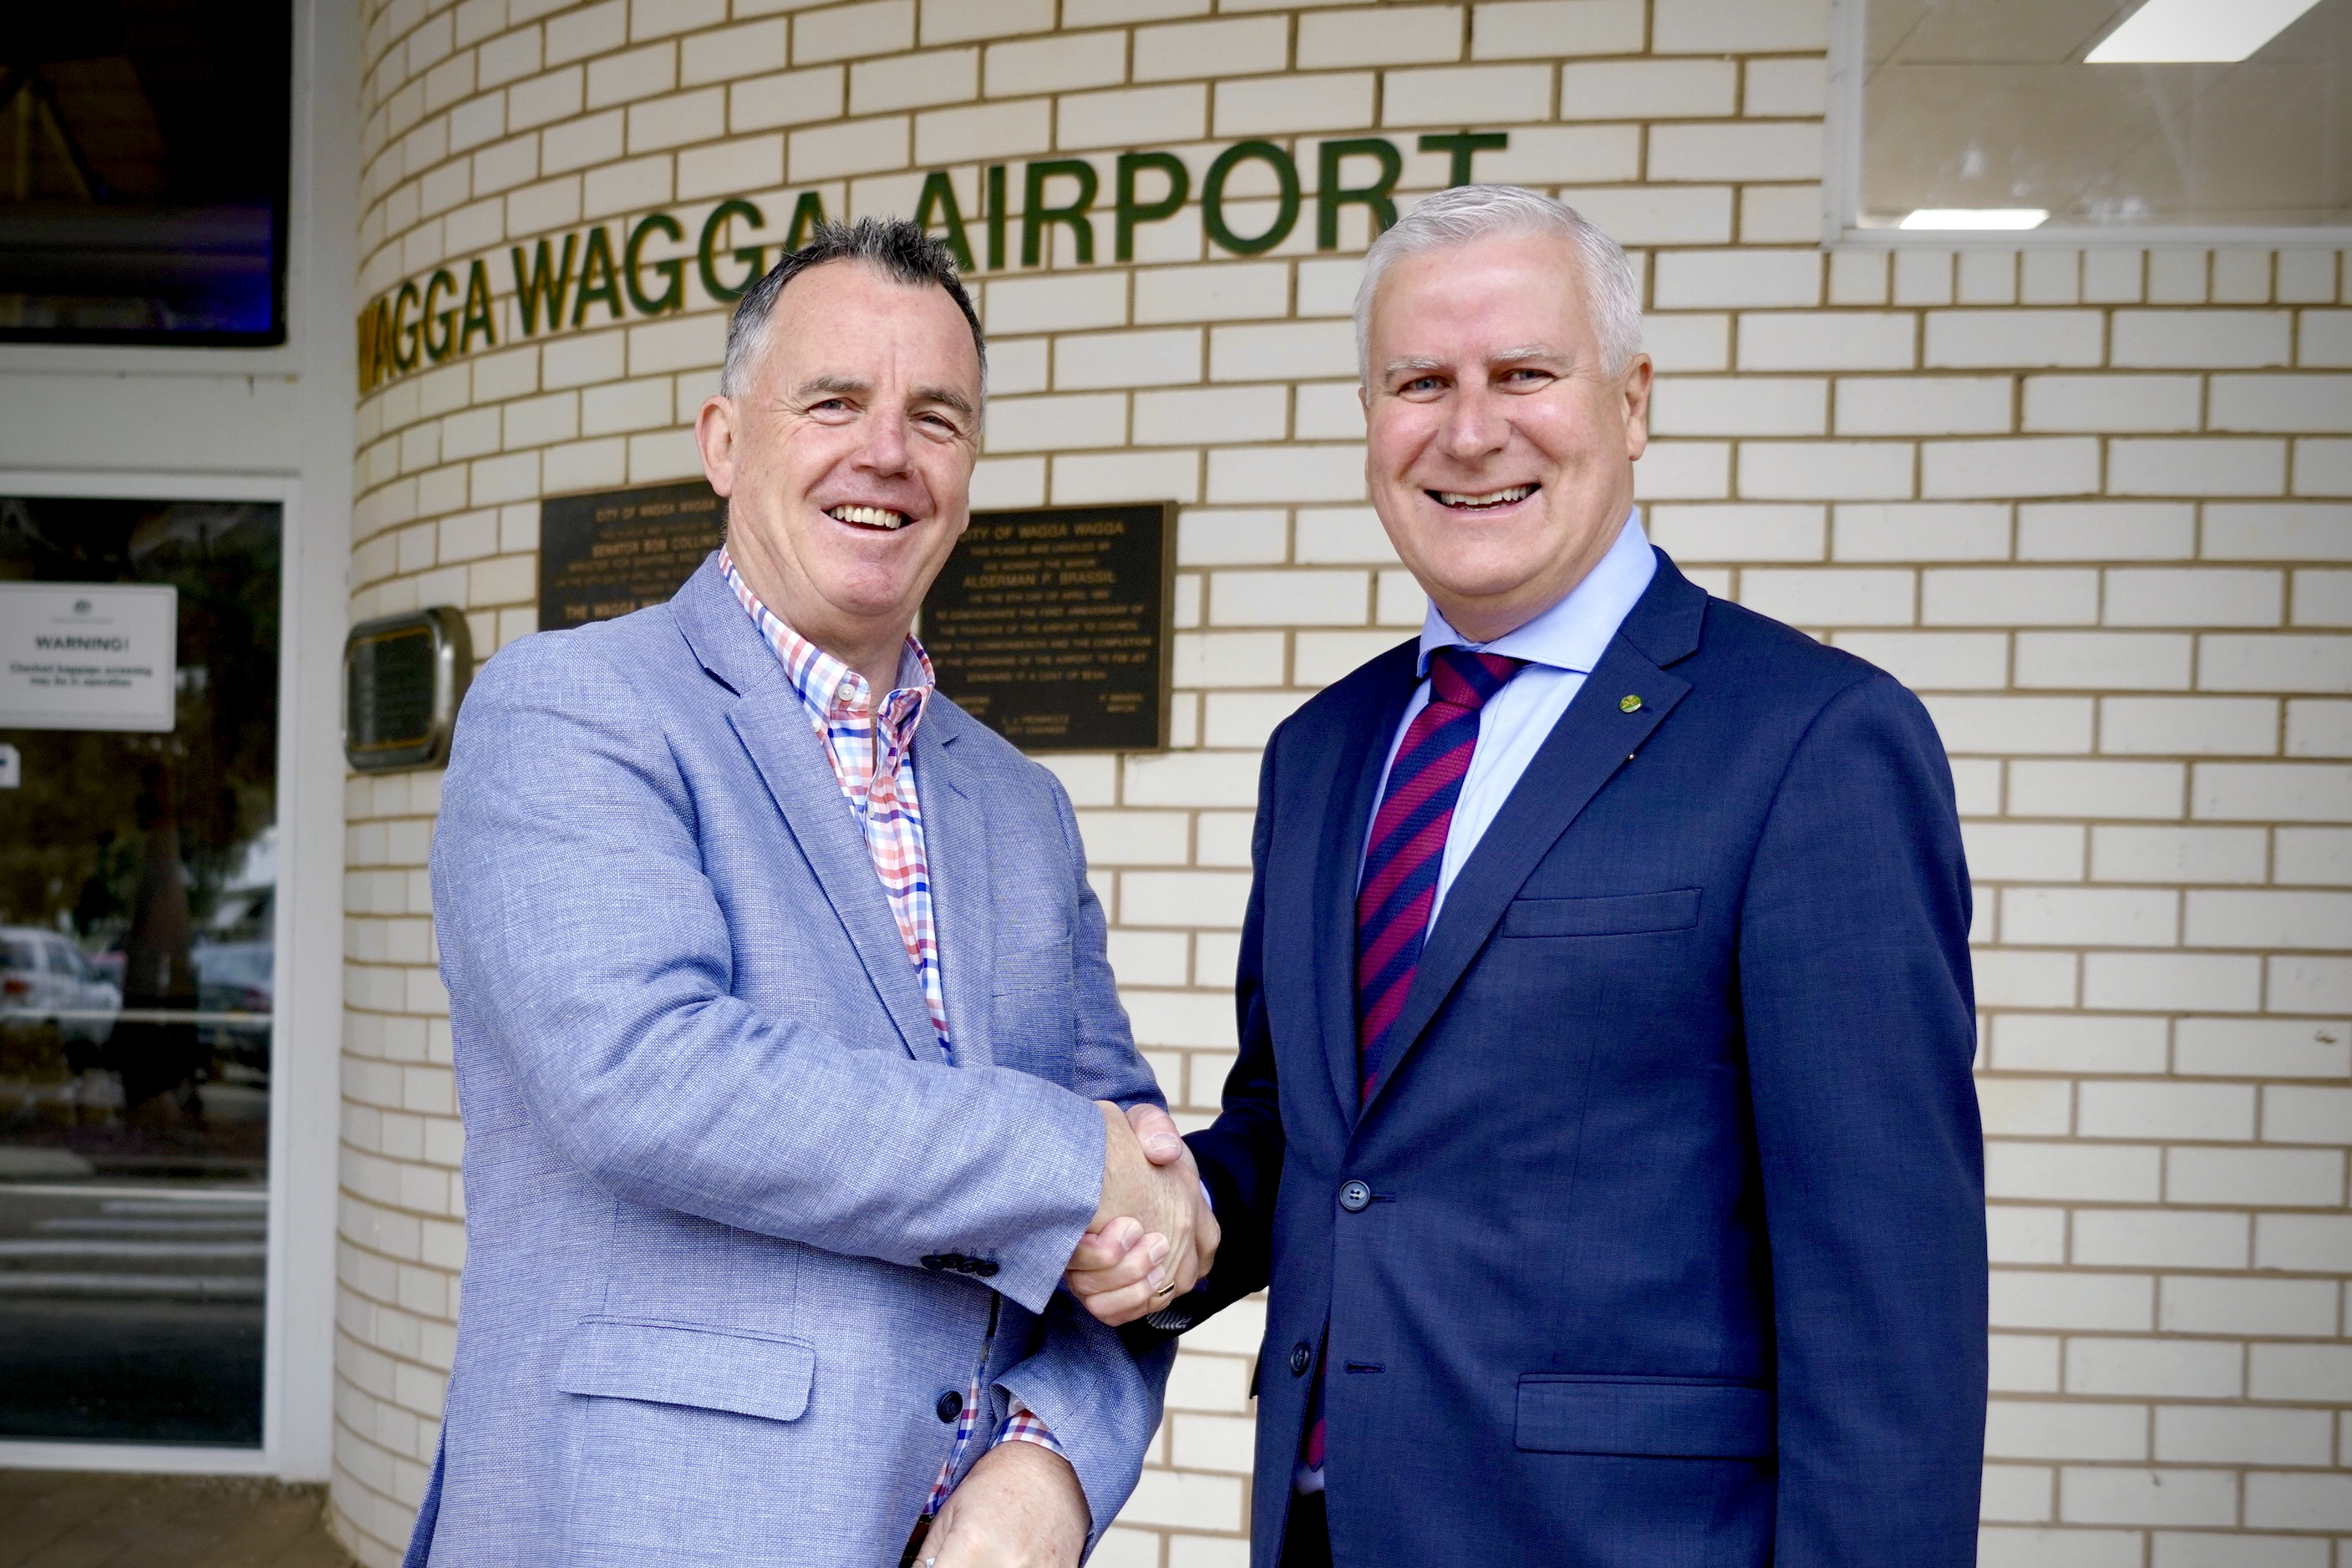 Wagga Mayor Dallas Tout and MP Michael McCormack shaking hands